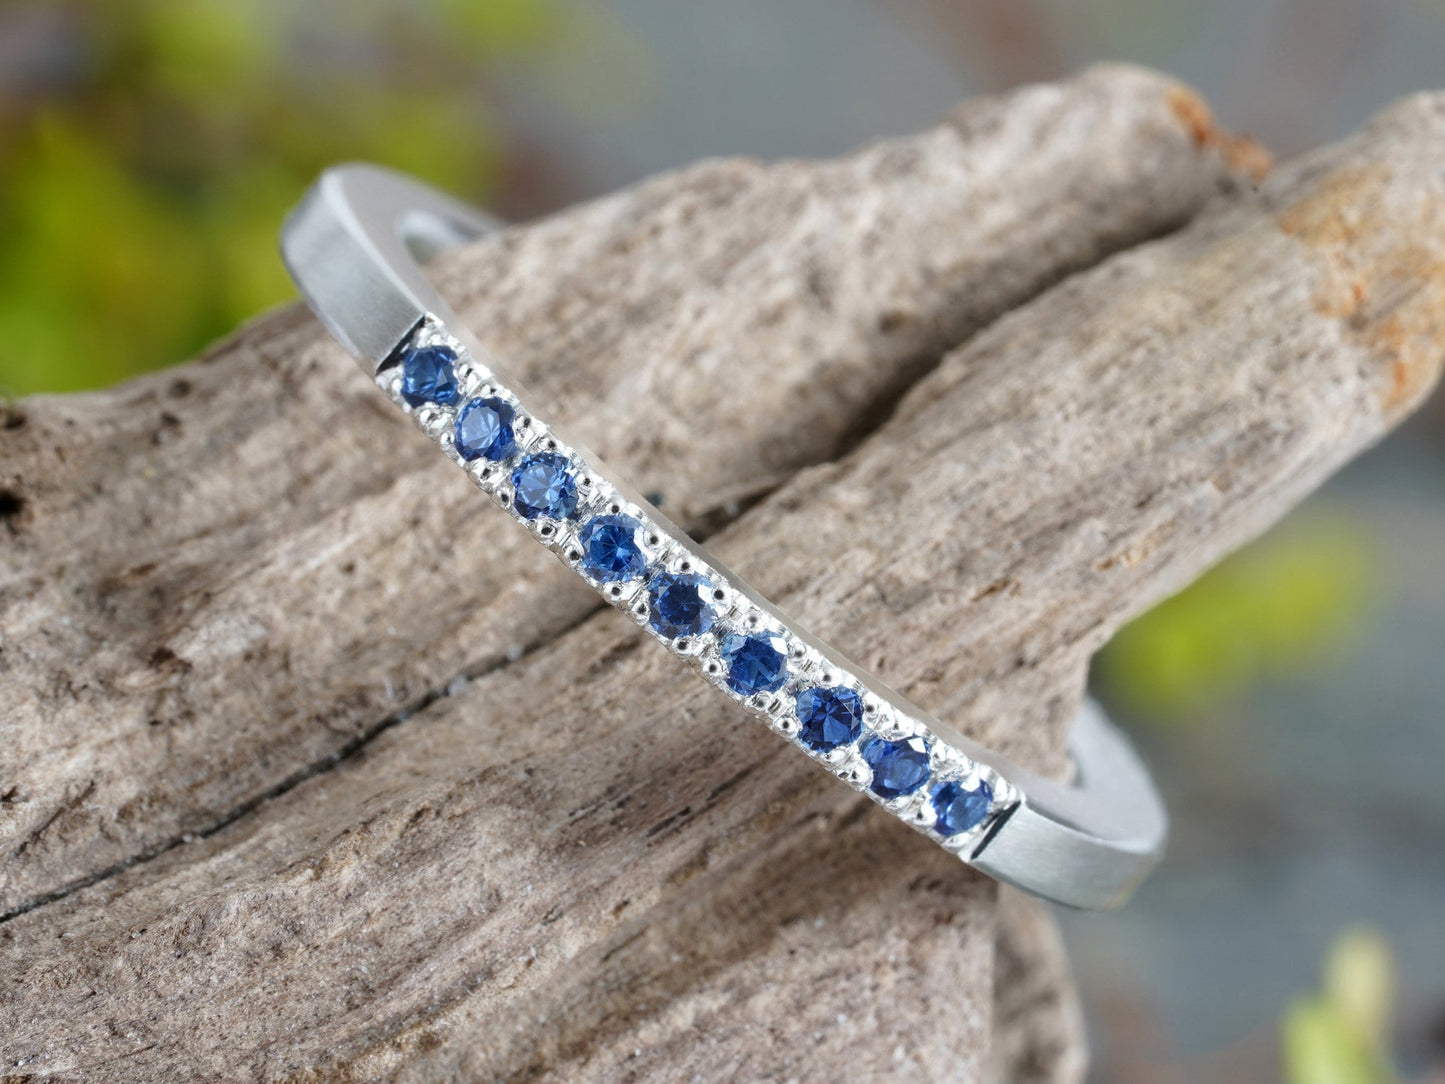 Sapphire Eternity Wedding Ring, Sapphire Anniversary Ring, Sapphire Wedding Band, Pave Set Sapphire Ring, Made to Order